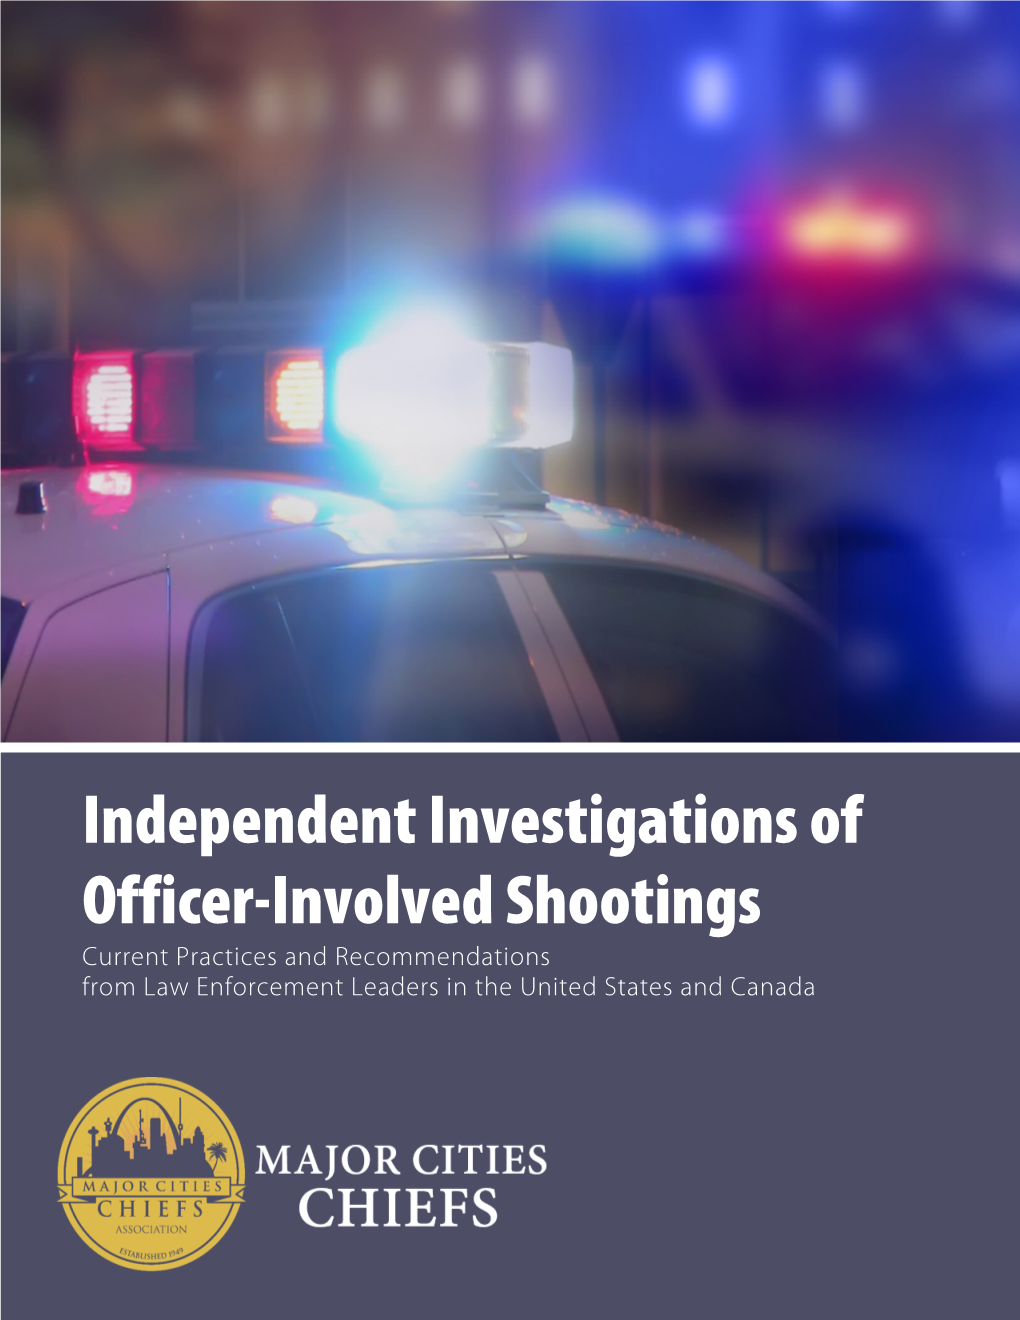 Independent Investigation of Officer-Involved Shootings: Current Practices and Recommendations from Law Leaders in the United States and Canada